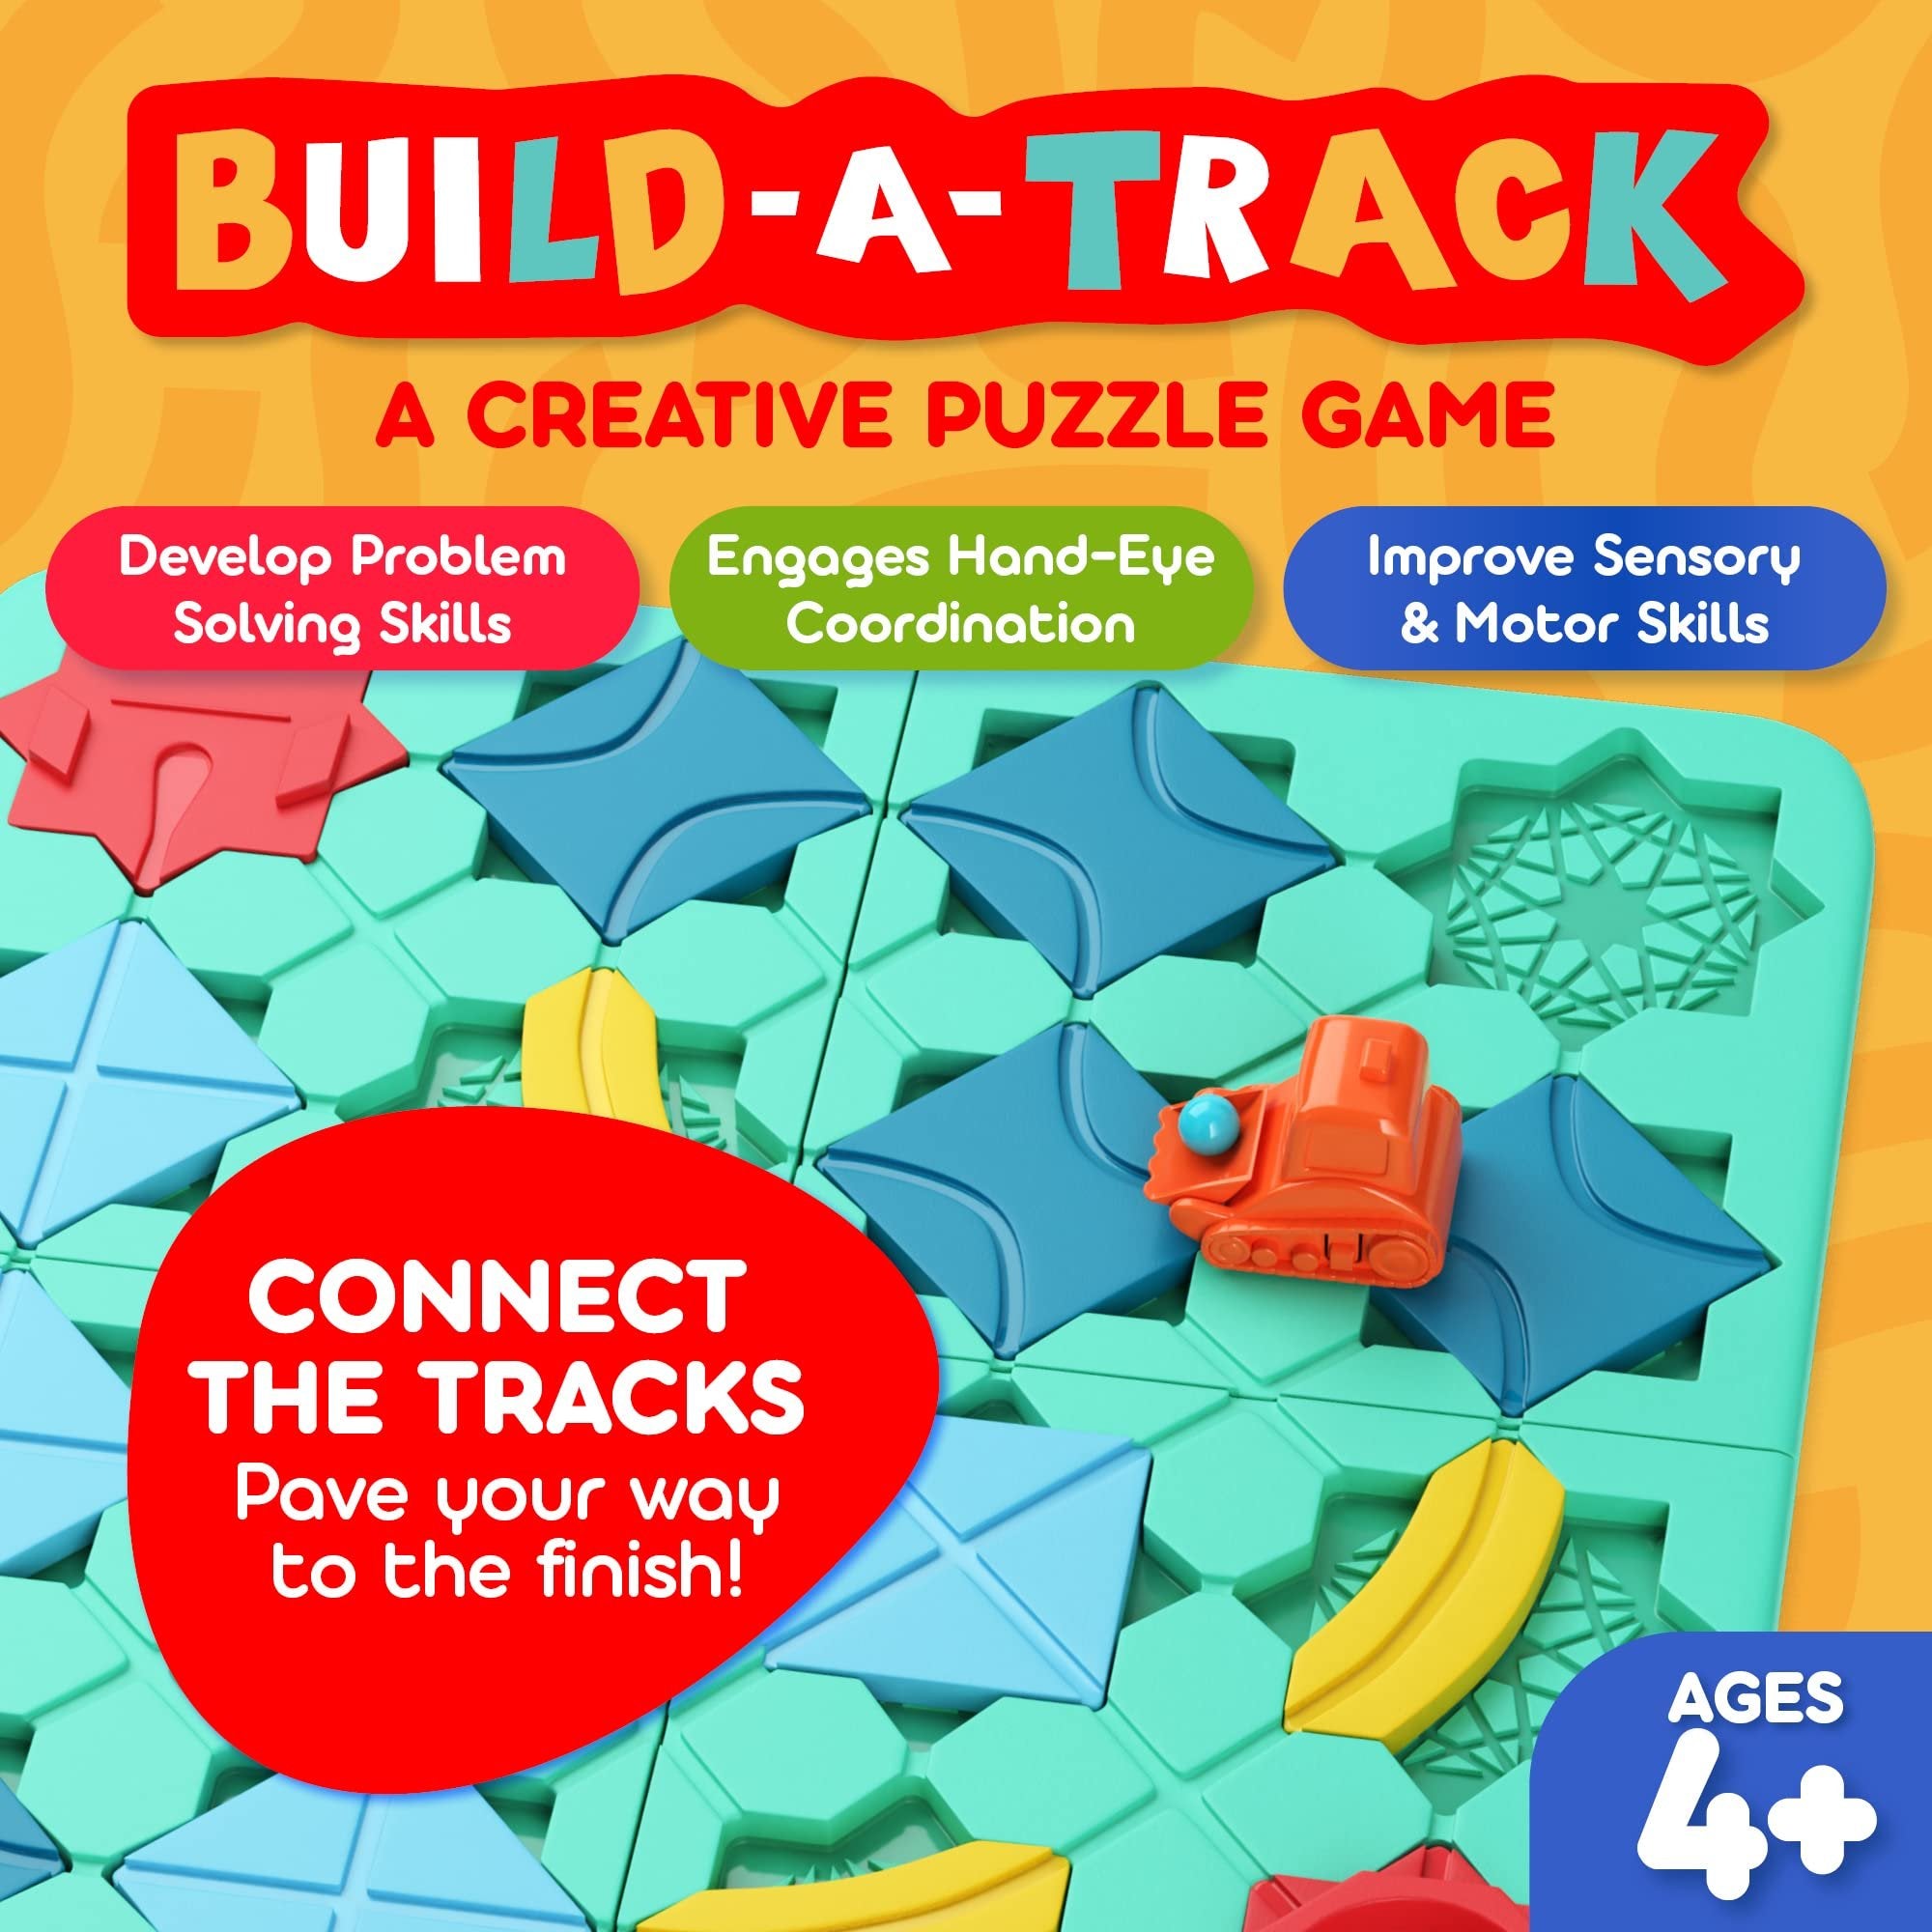 CoolToys Build-A-Track Brain Teaser Puzzles for Kids Ages 4-8 - Educational Smart Logic Board Game for Children, 4 Levels & 100+ Skill-Building Challenges, Fun Home & Travel Boys & Girls STEM Activity